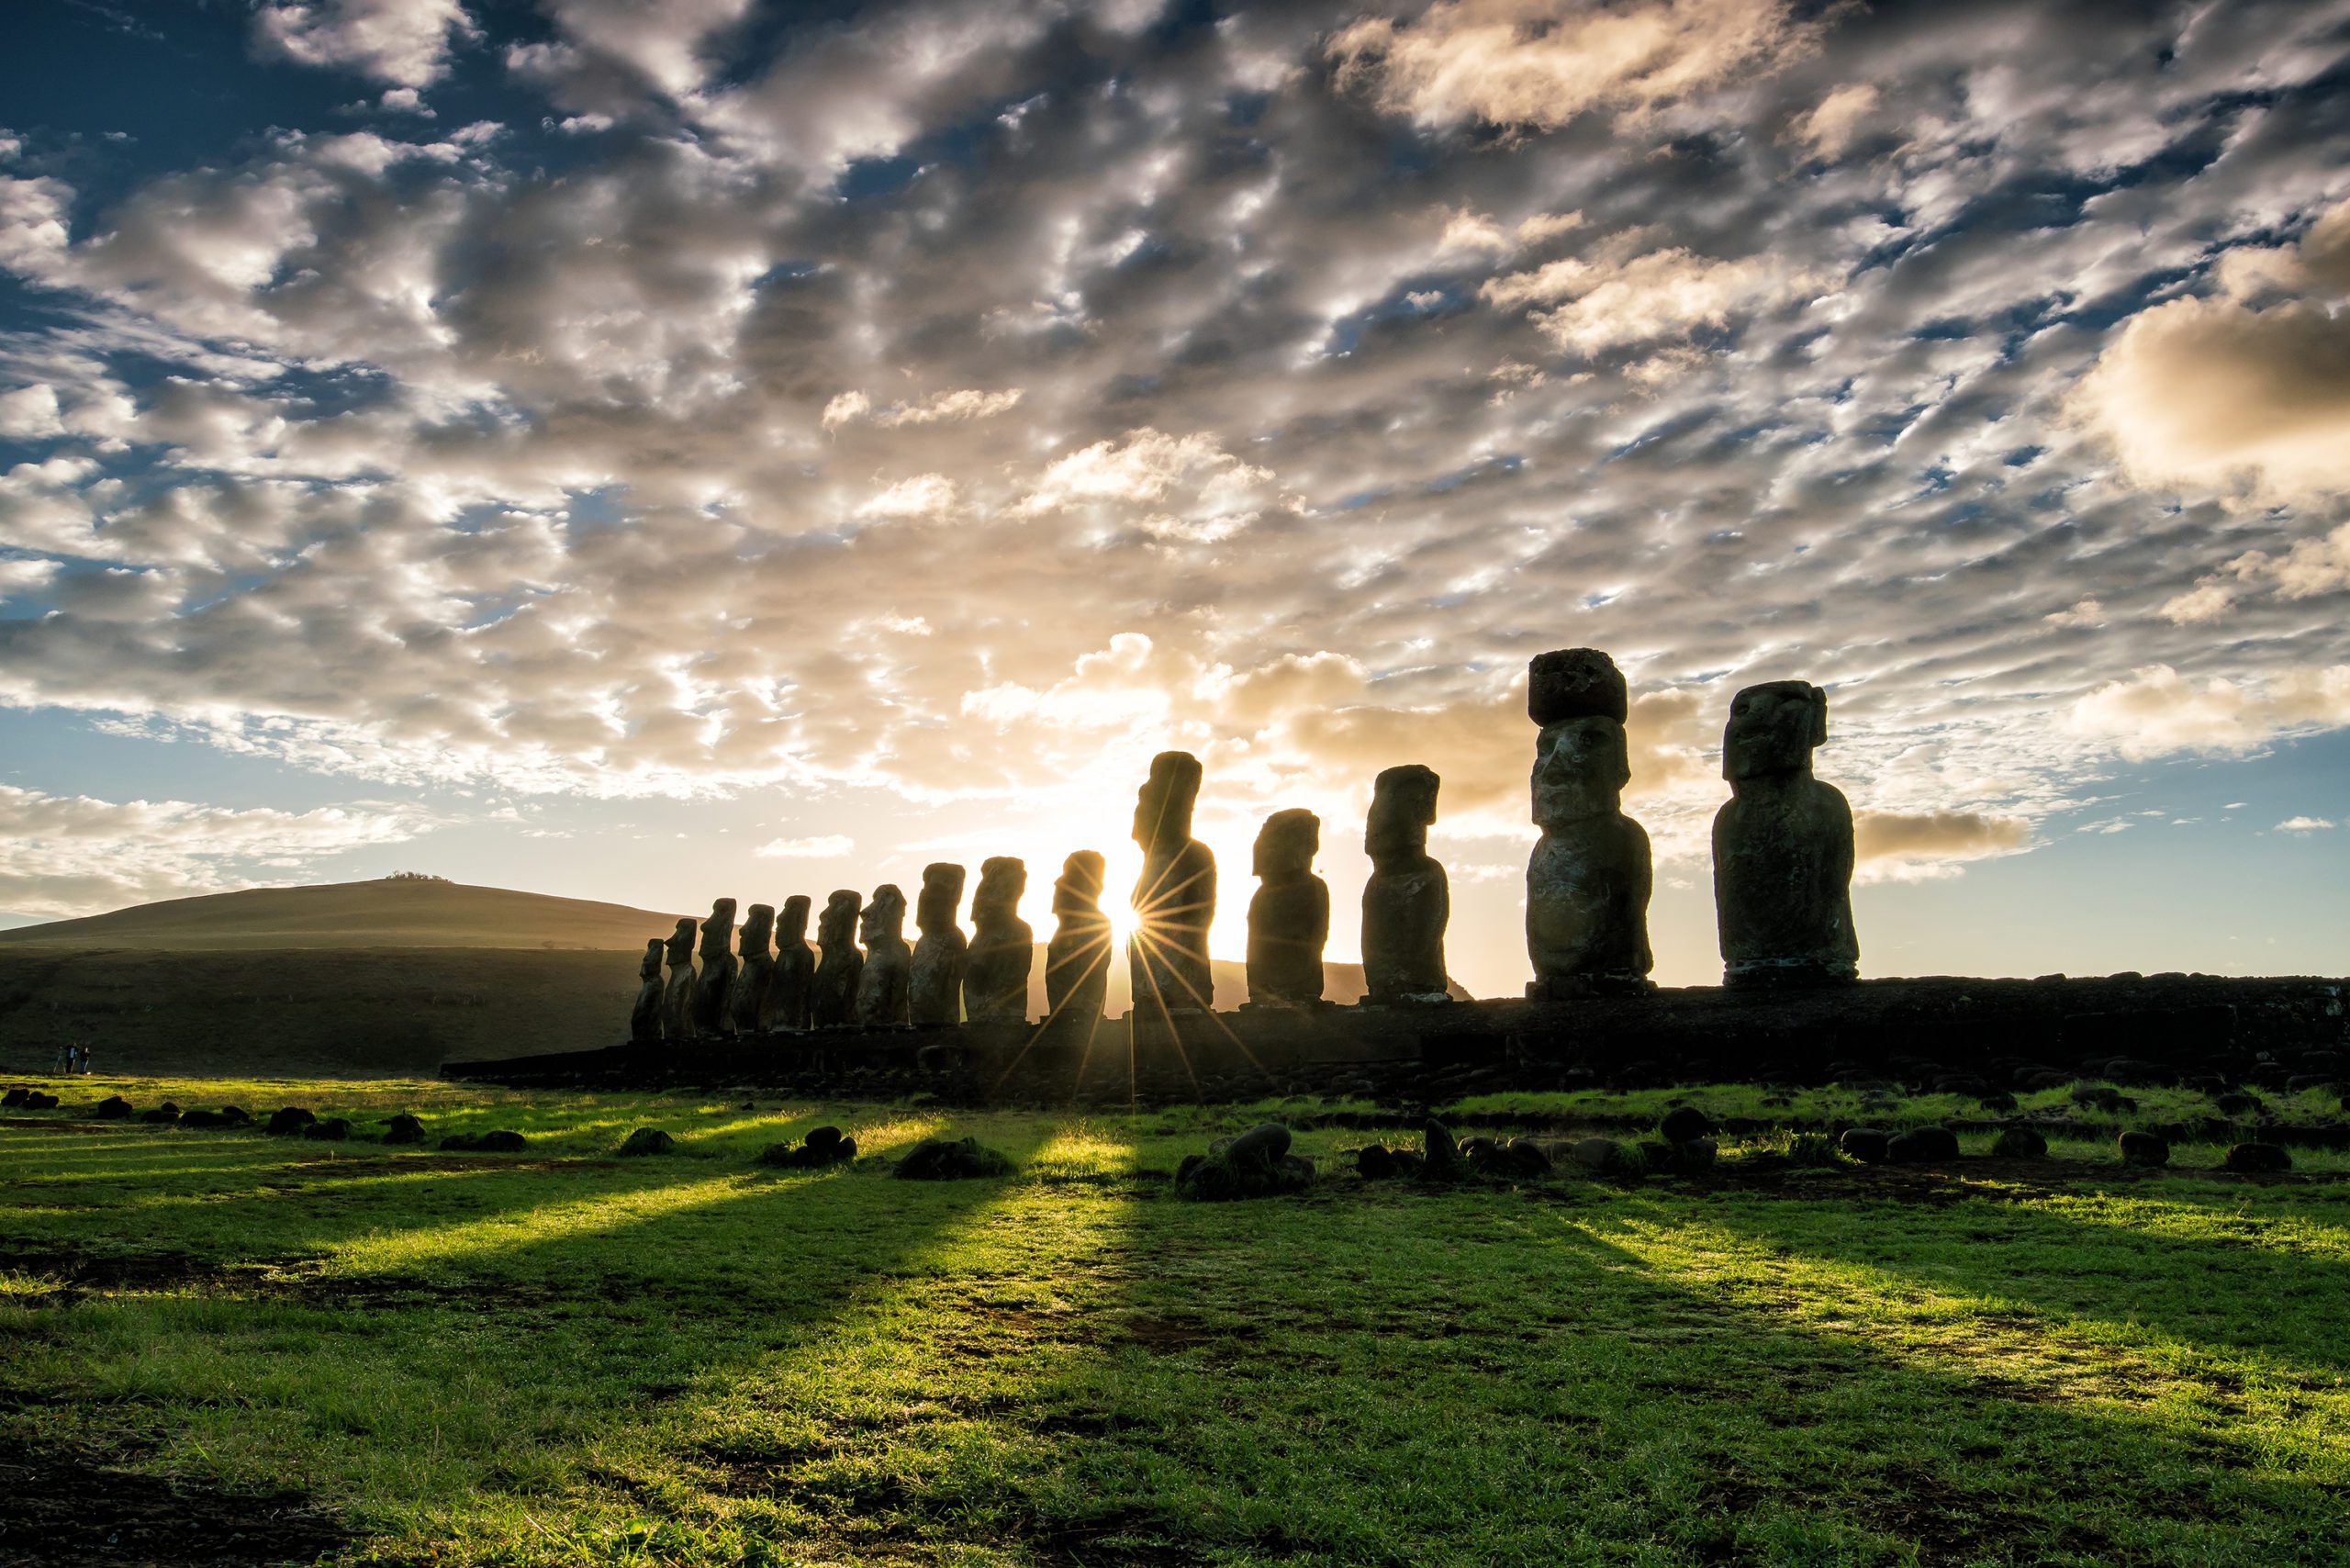 Silhouette shot of Moai statues in Easter Island